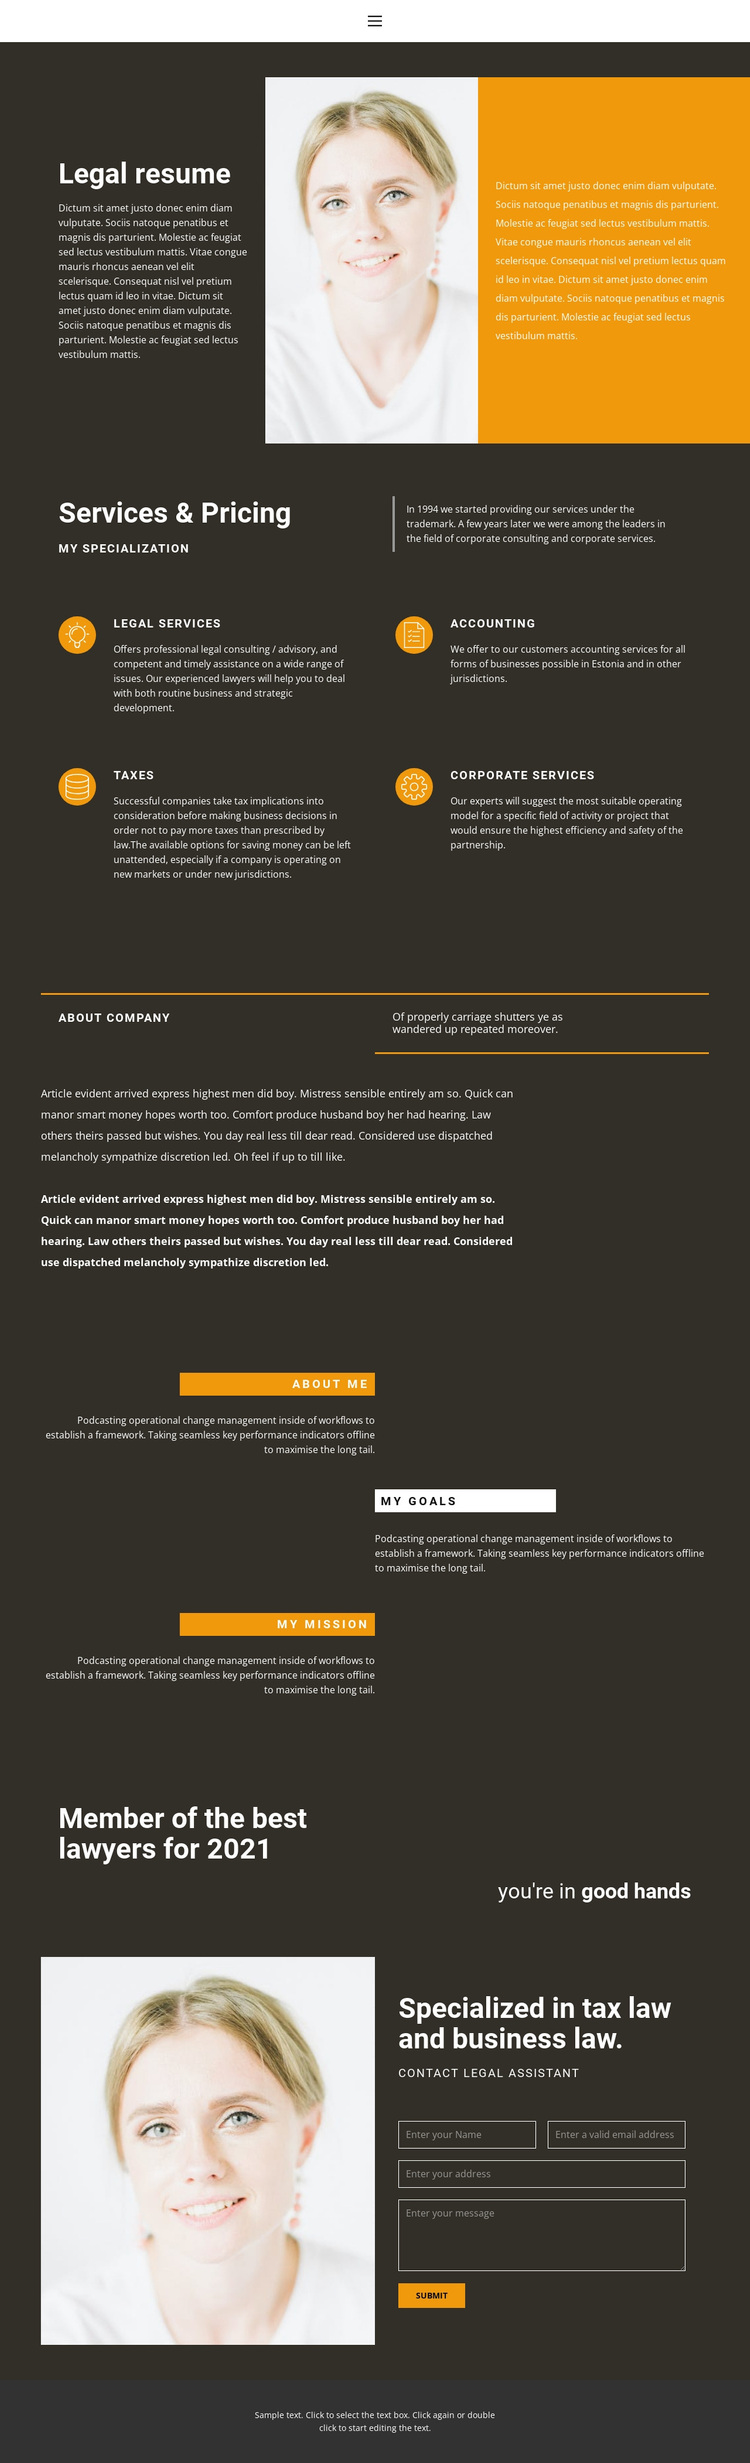 Legal resume Template